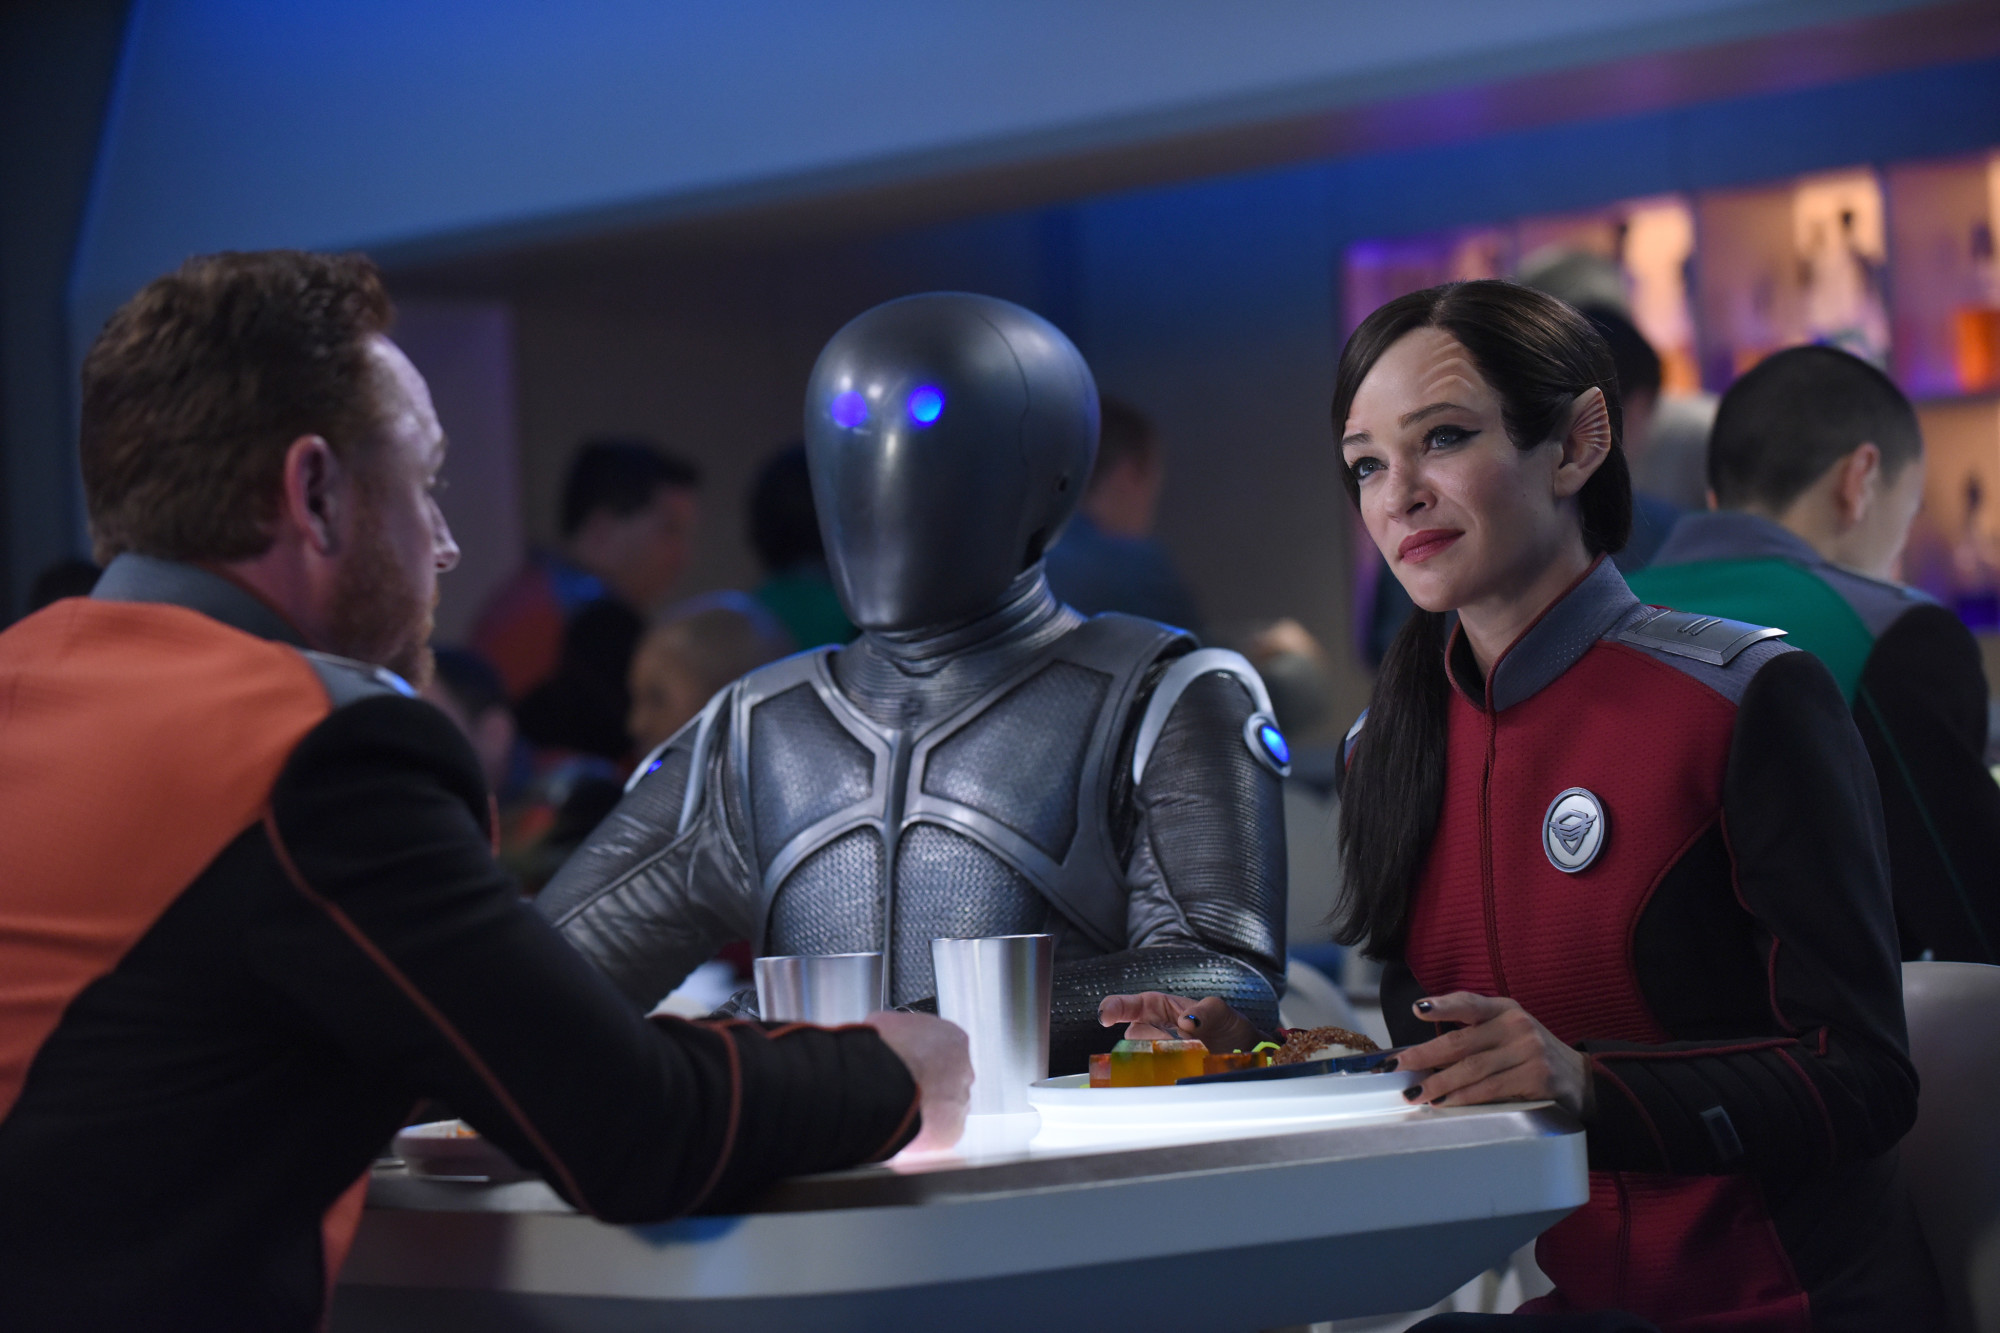 Orville_Ep206-Sc37-RayM_0418_webres